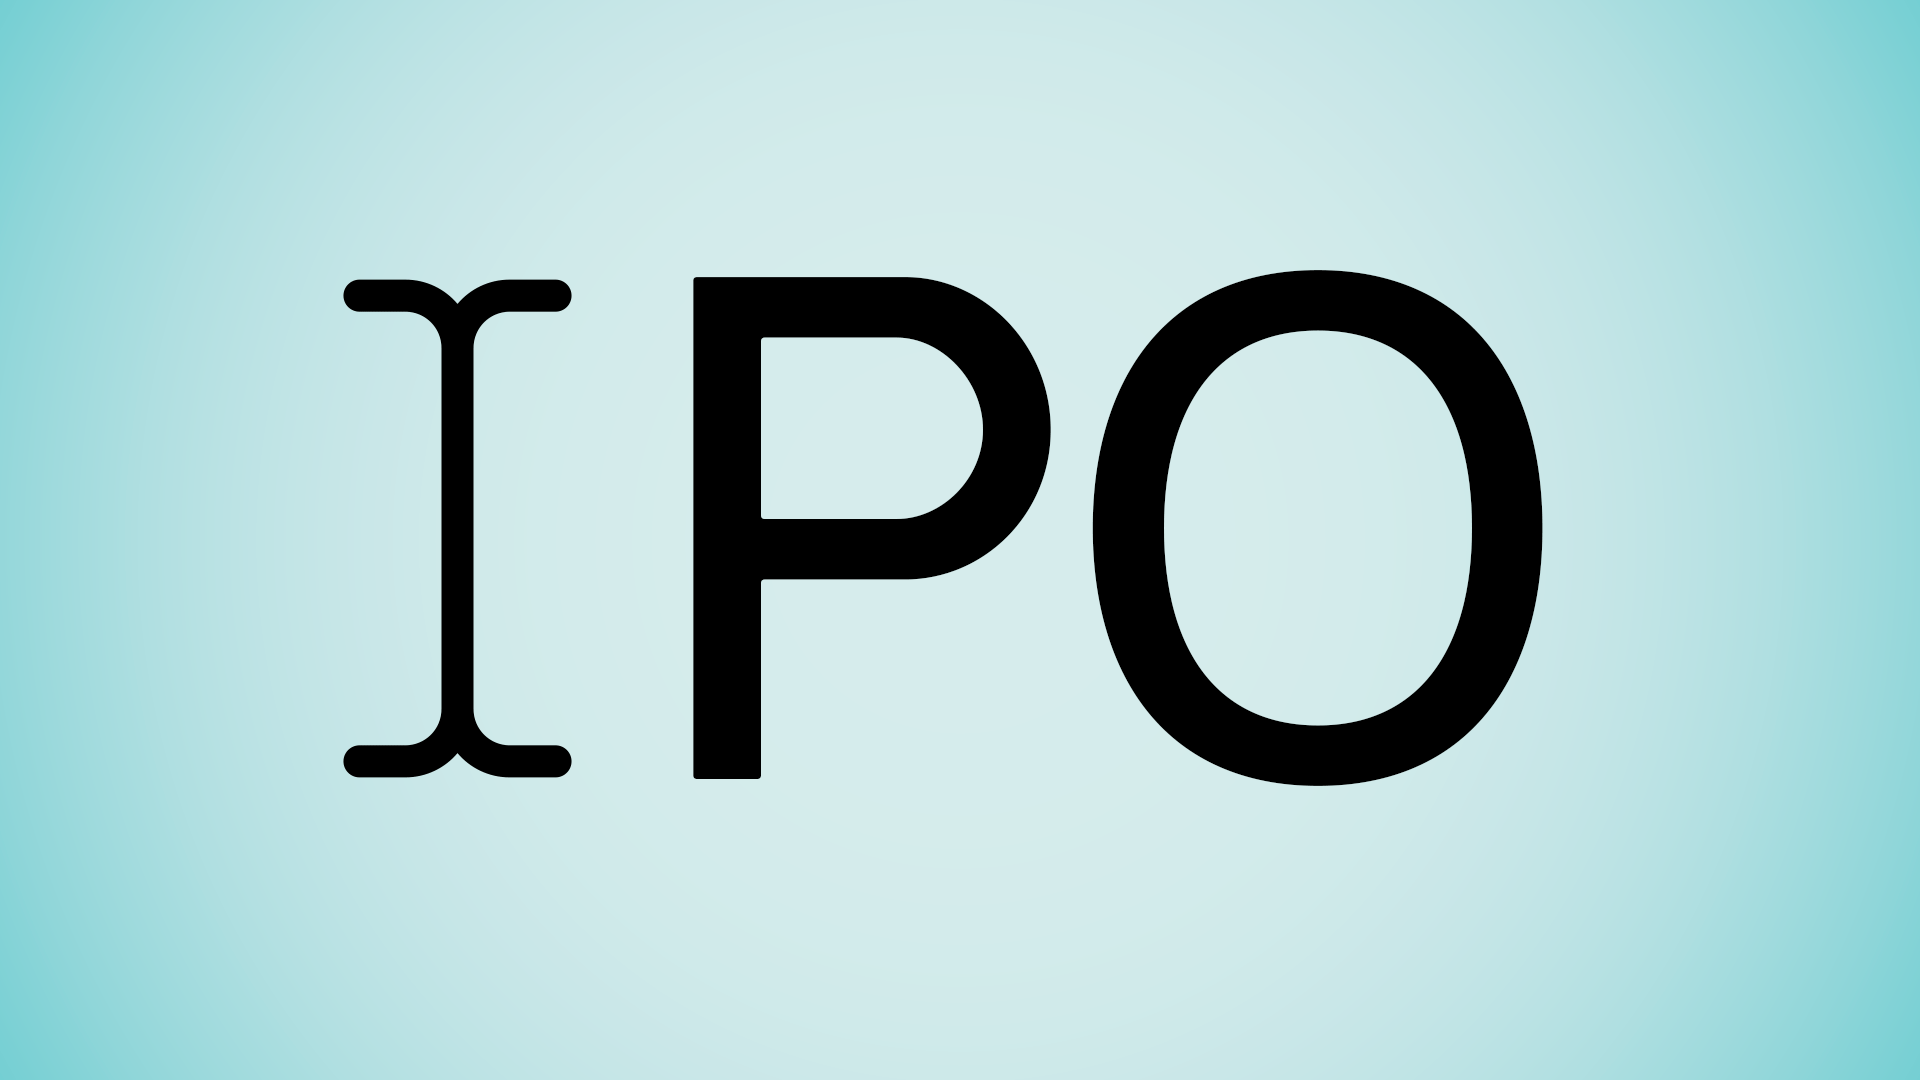 Animated illustration of a blinking cursor forming the "I" in "IPO".